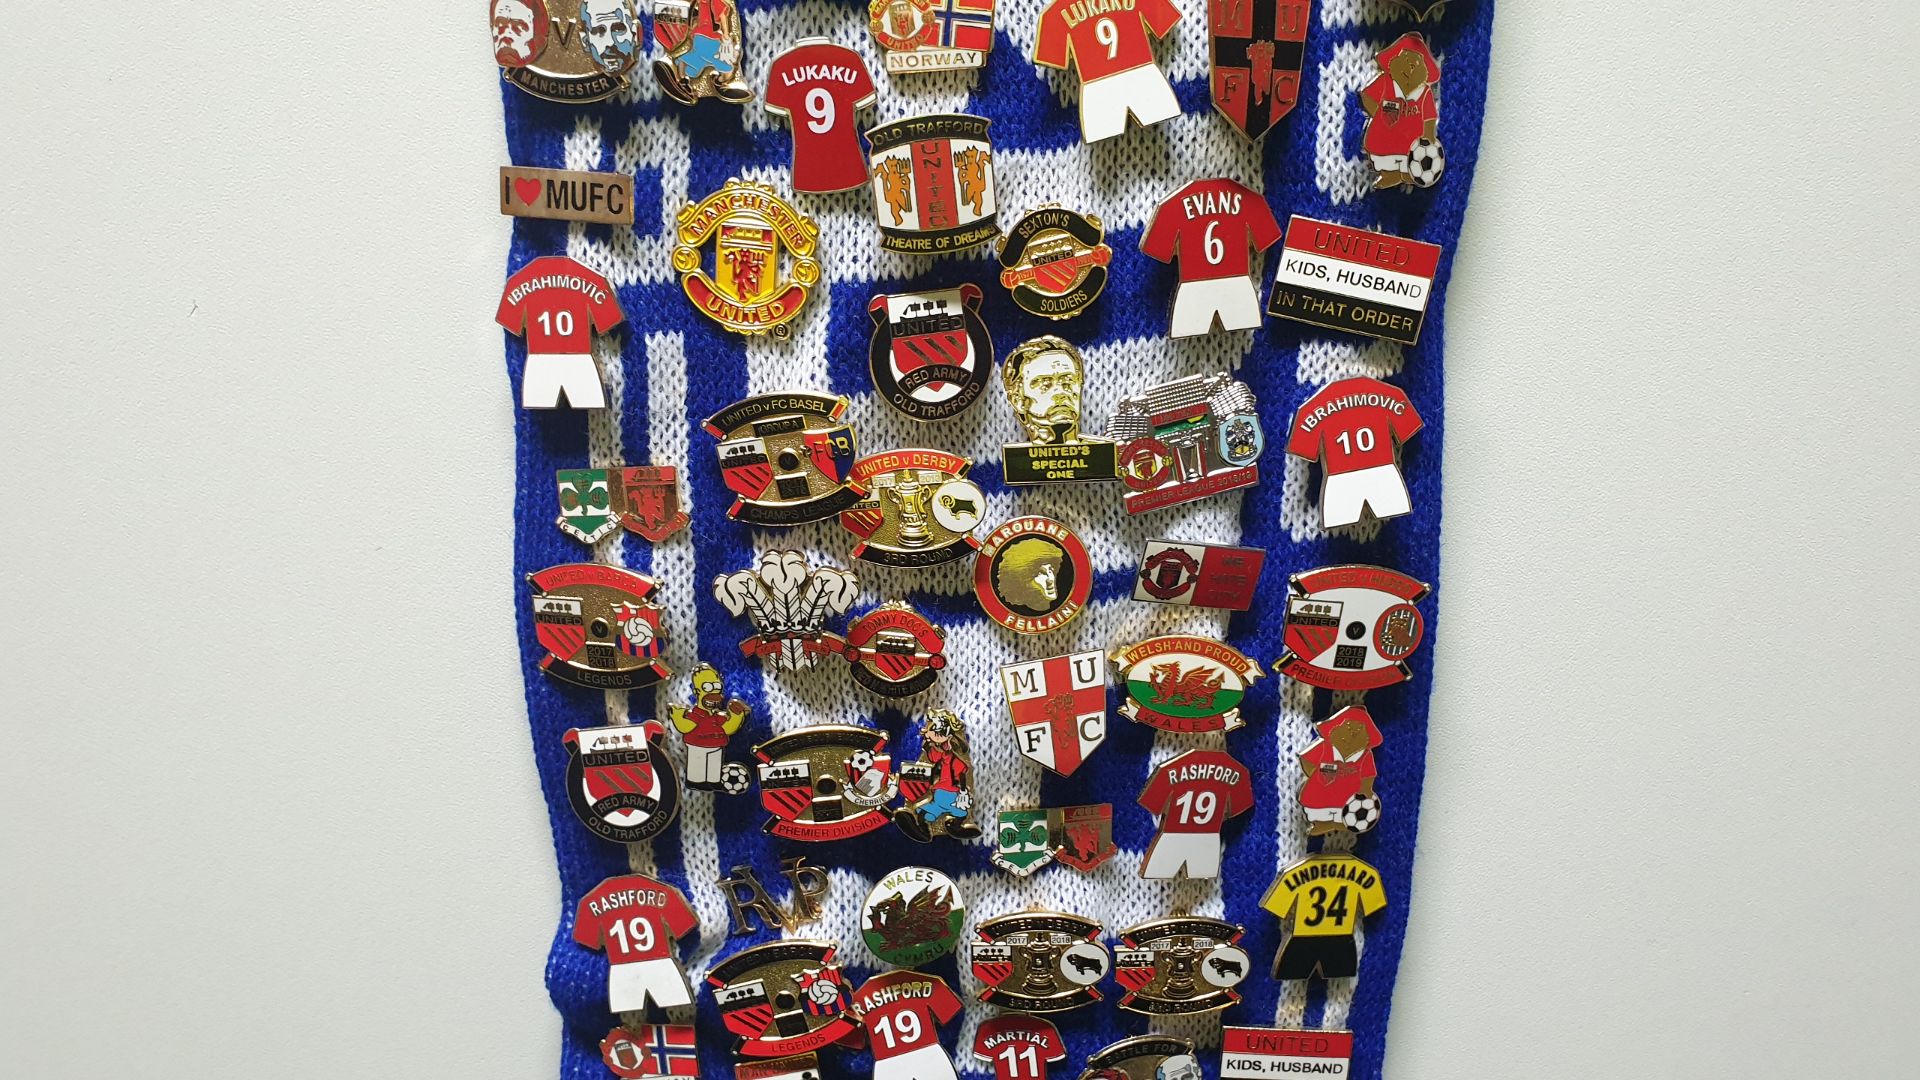 MANCHESTER UNITED SCARF CONTAINING APPROX 250 X PIN BADGES IE BATTLE FOR MANCHESTER, MUFC, - Image 6 of 8